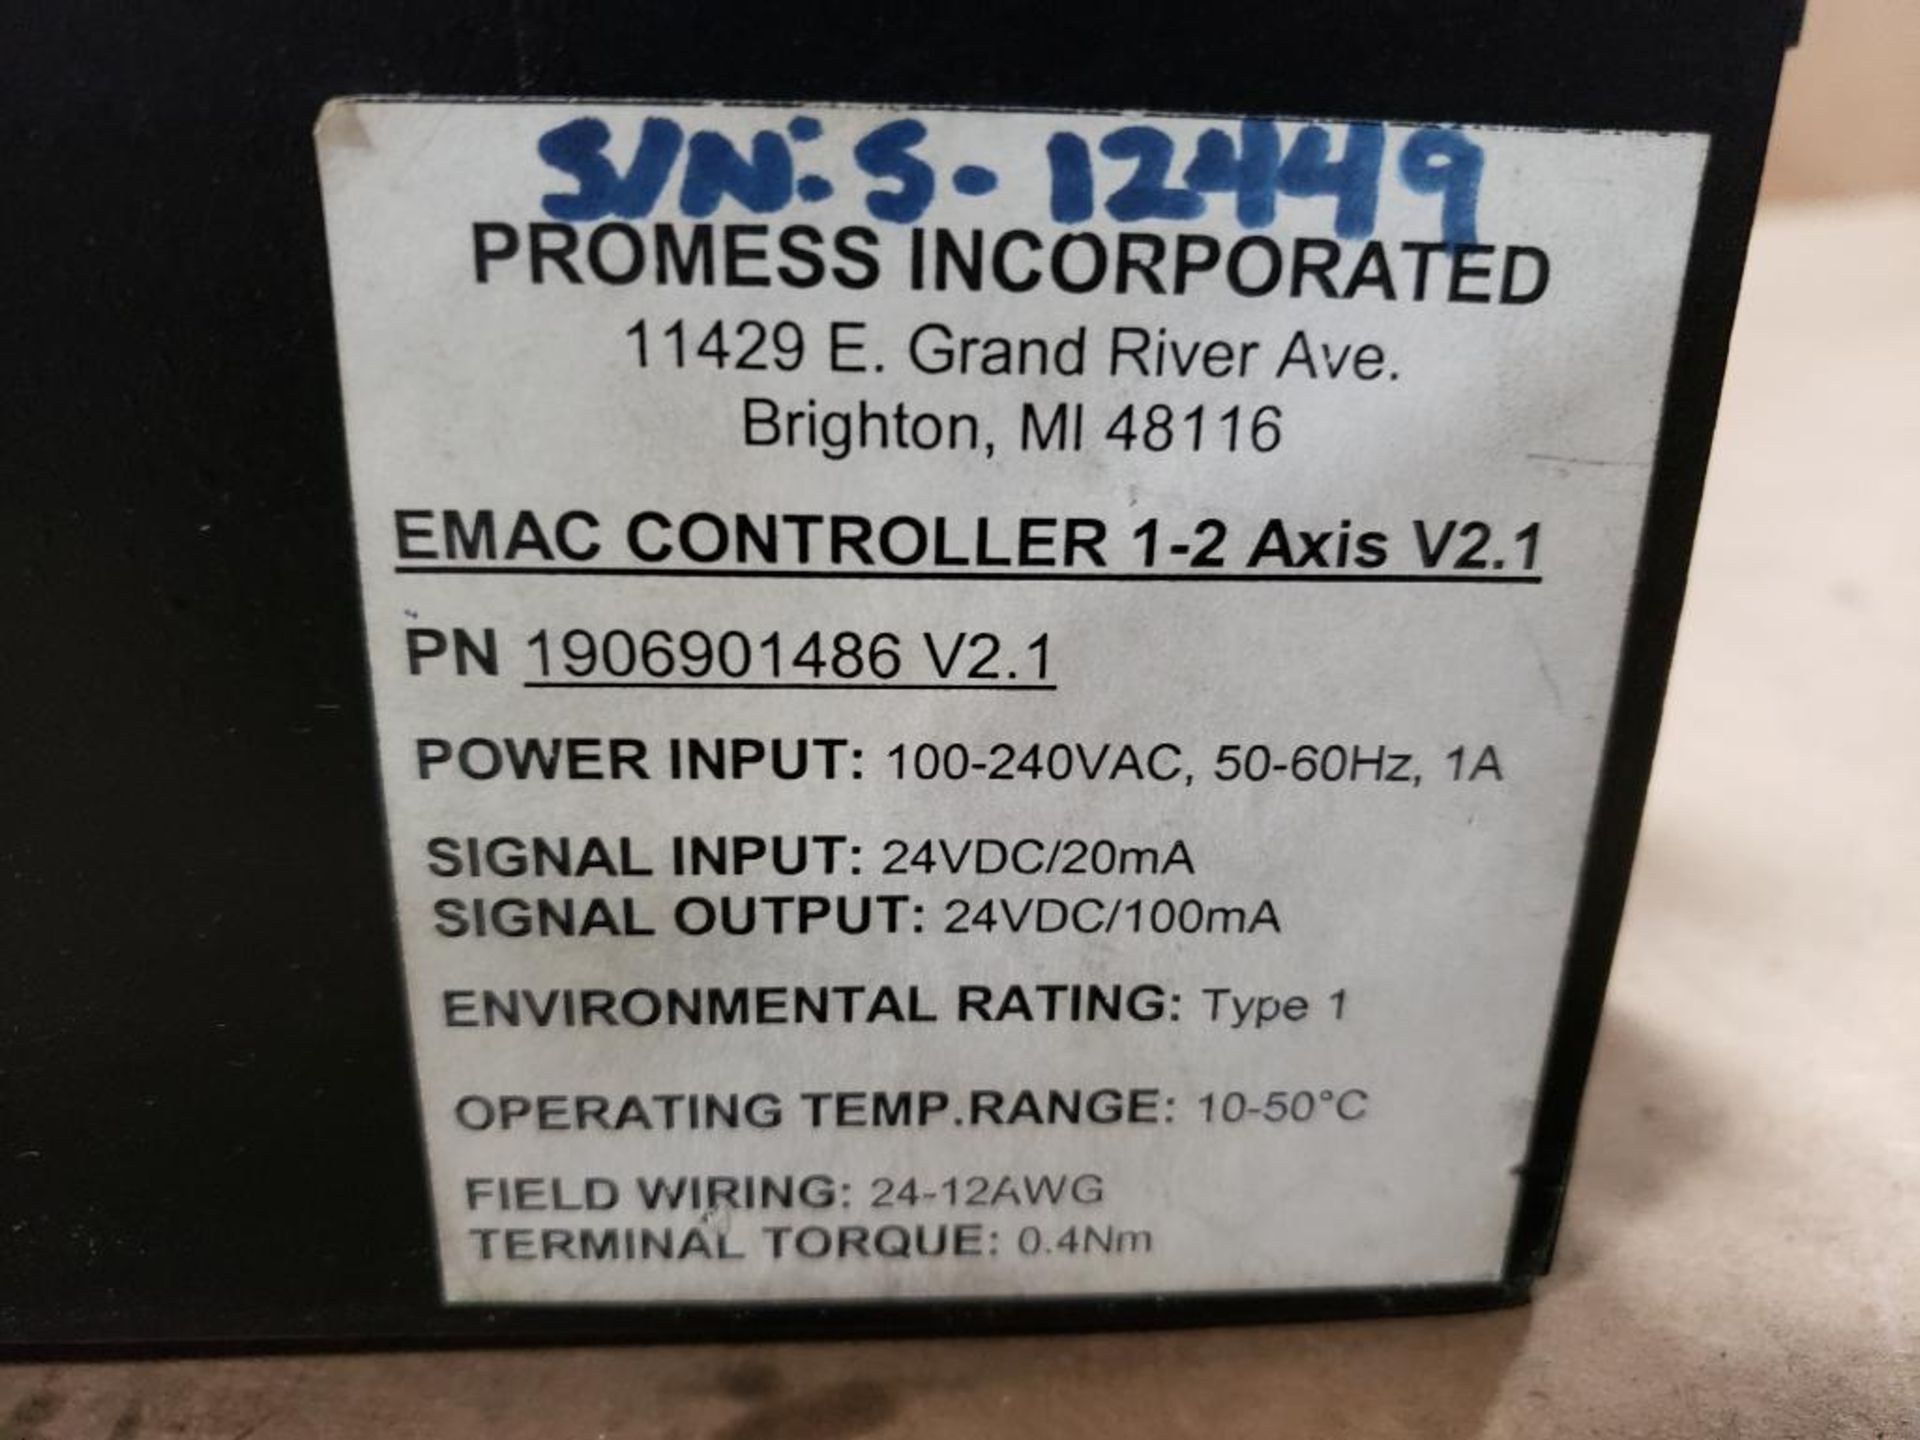 Promess drive. EMAC controller. 1-2 Axis. V2.1. Part number 1906901486 V2.1. - Image 2 of 5